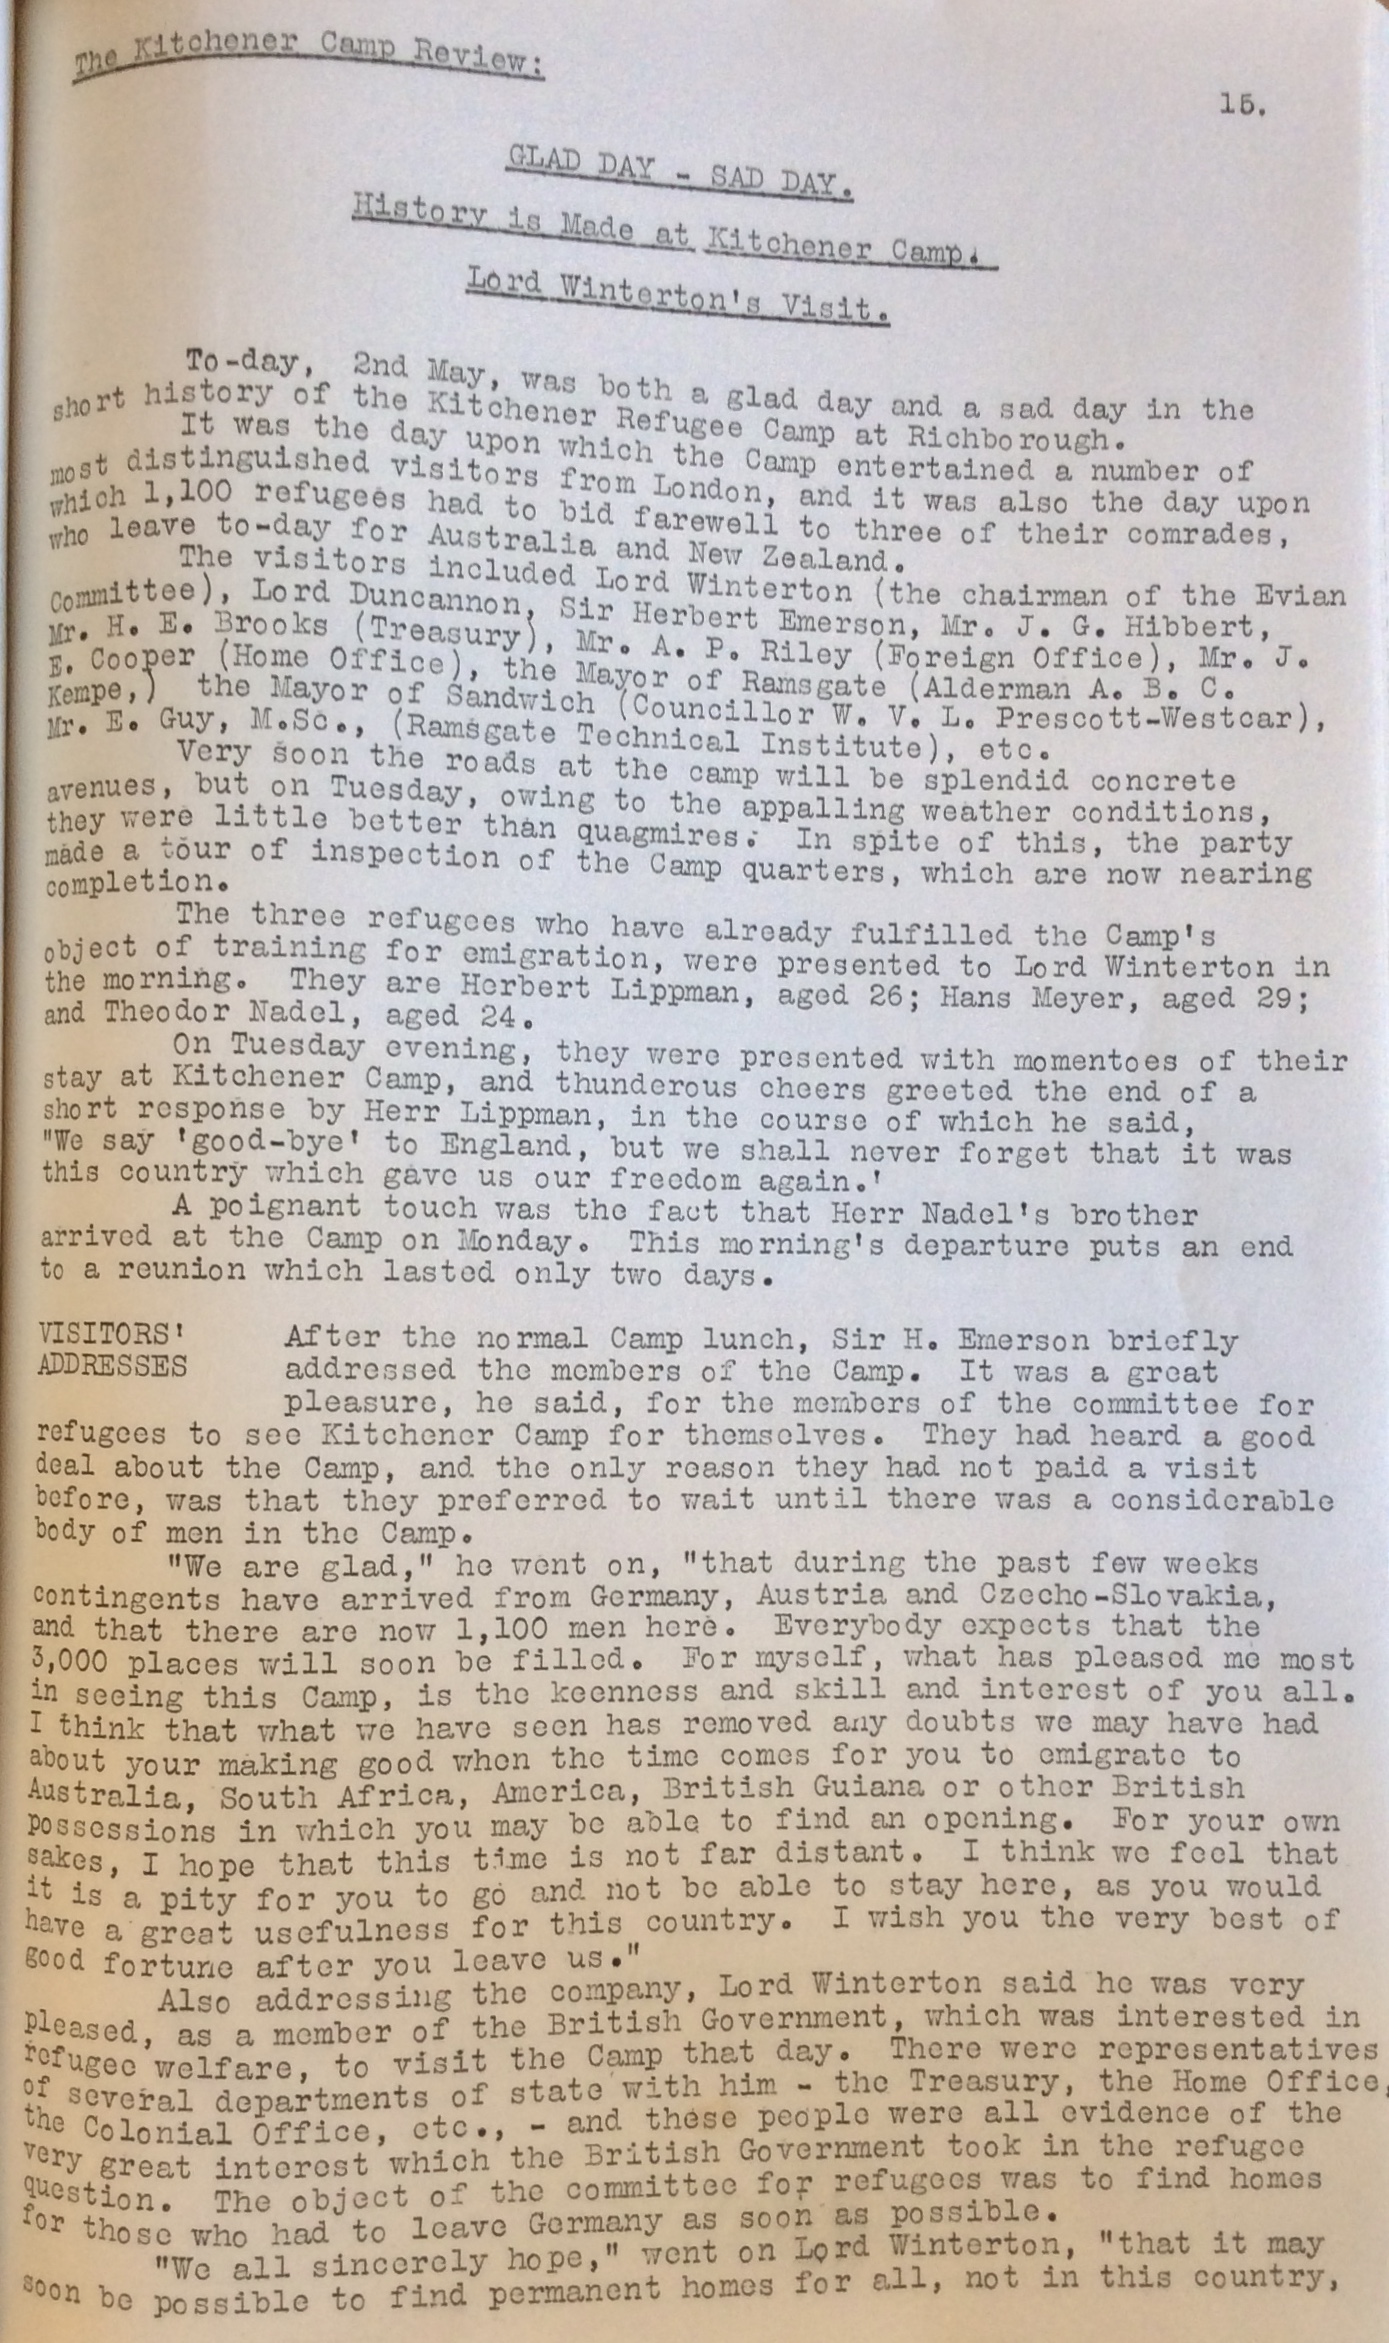 Kitchener Camp Review, June 1939, page 15